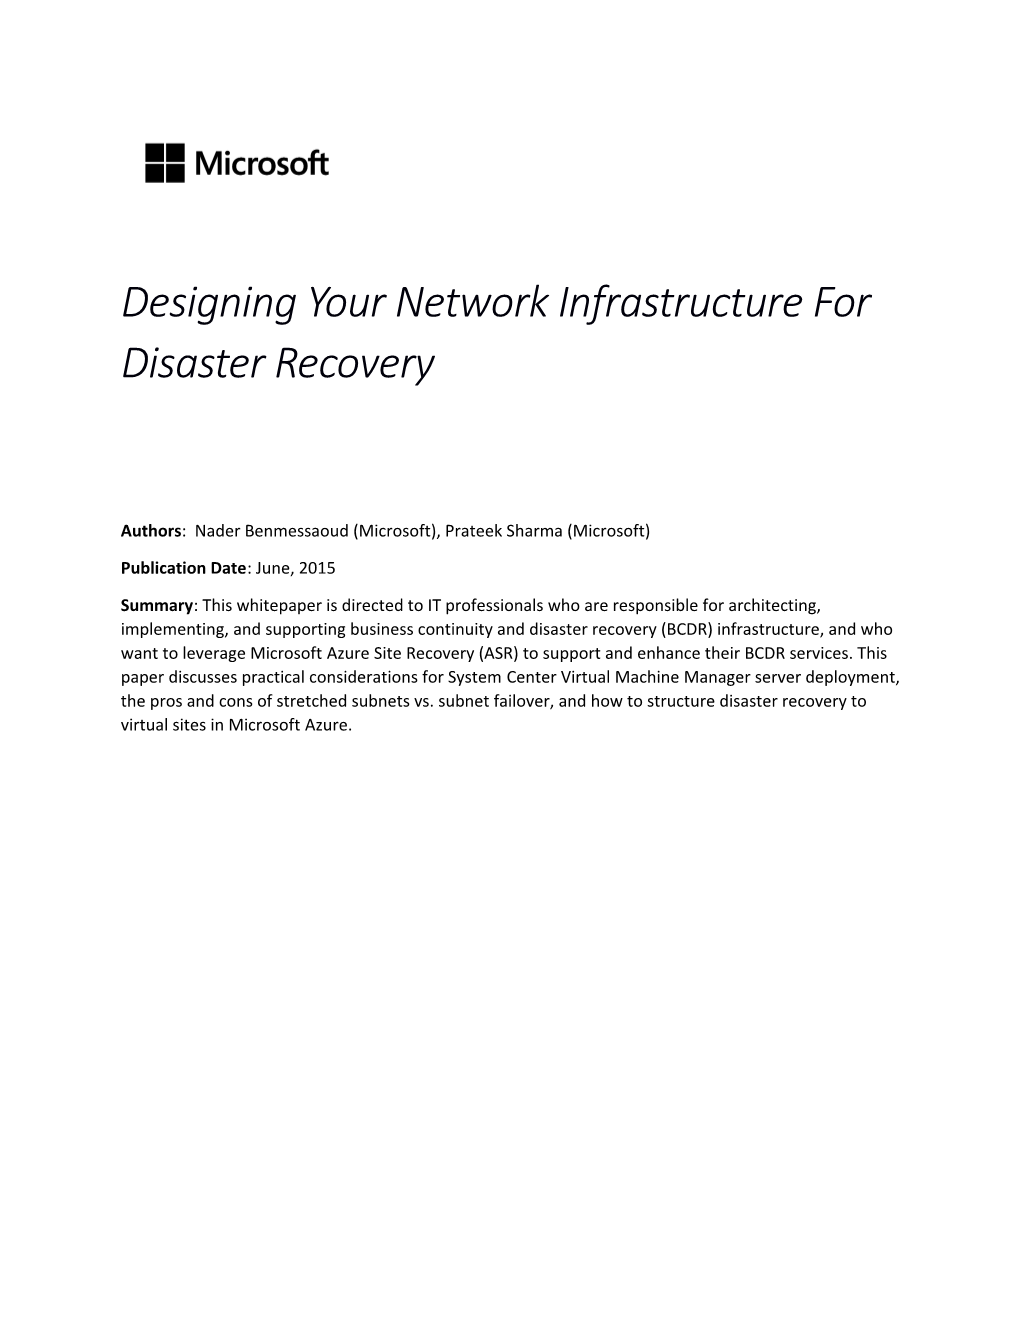 Designing Your Network Infrastructure for Disaster Recovery